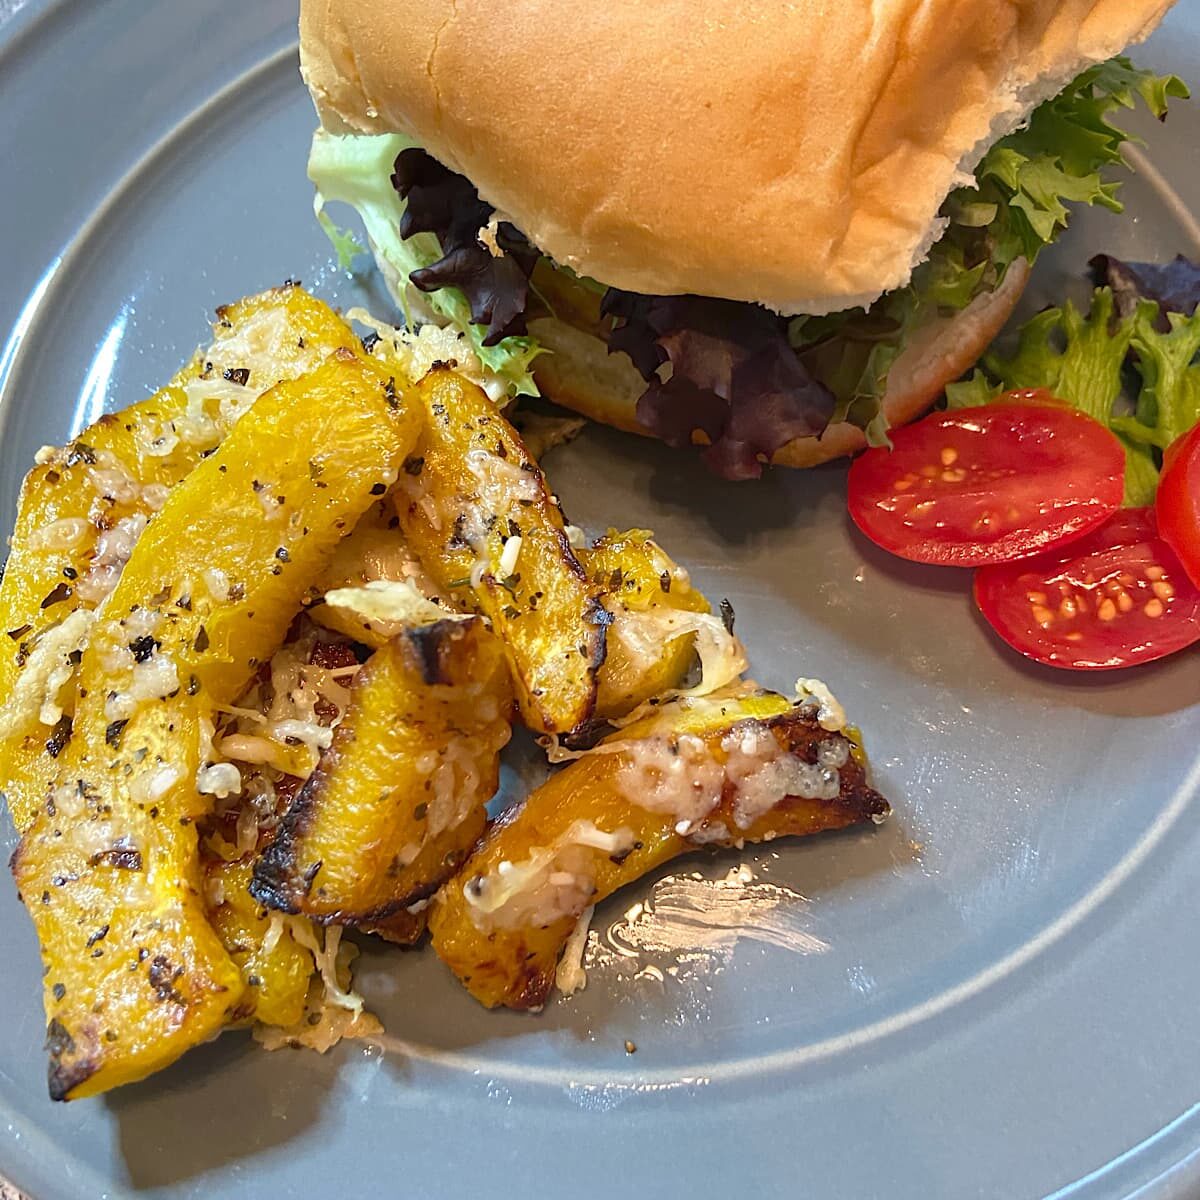 Roasted Squash on plate with burger, tomatoes, and lettuce. 